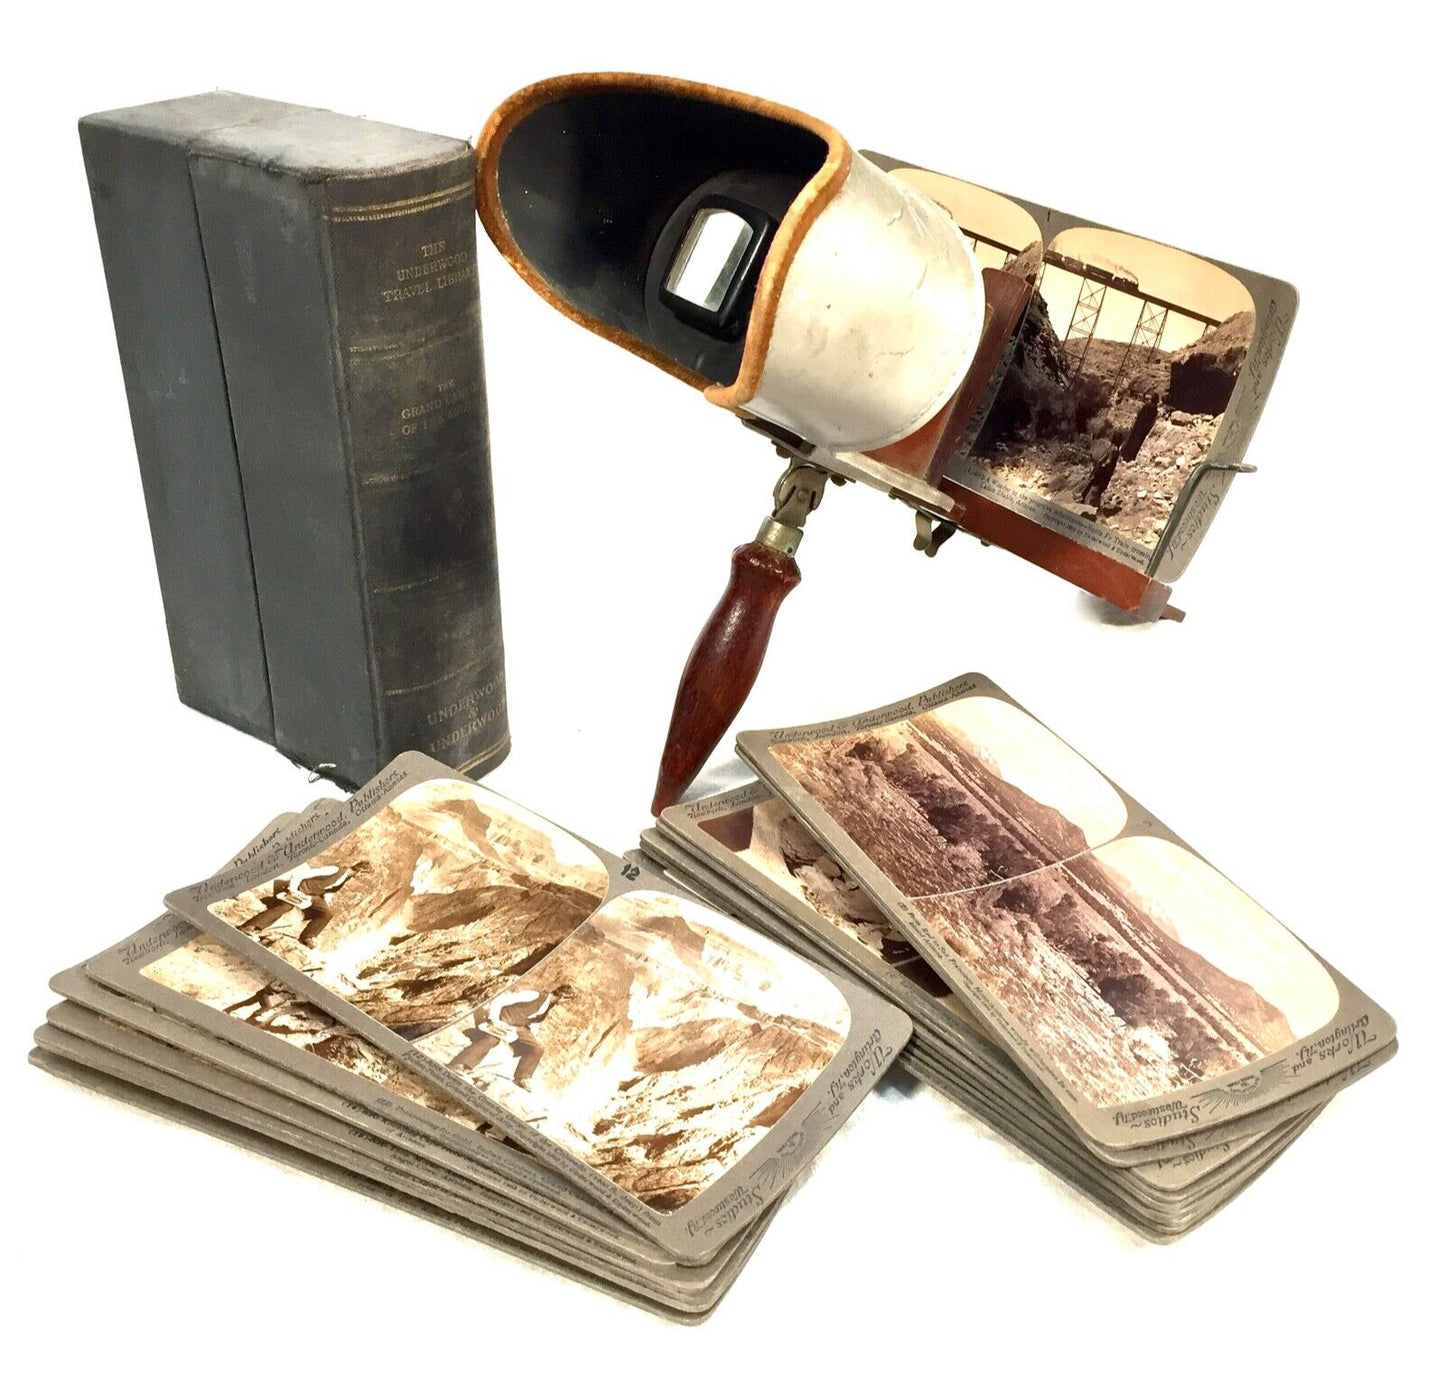 Antique Stereo Viewer / Stereoscope By Underwood & Underwood & Slide Job Lot